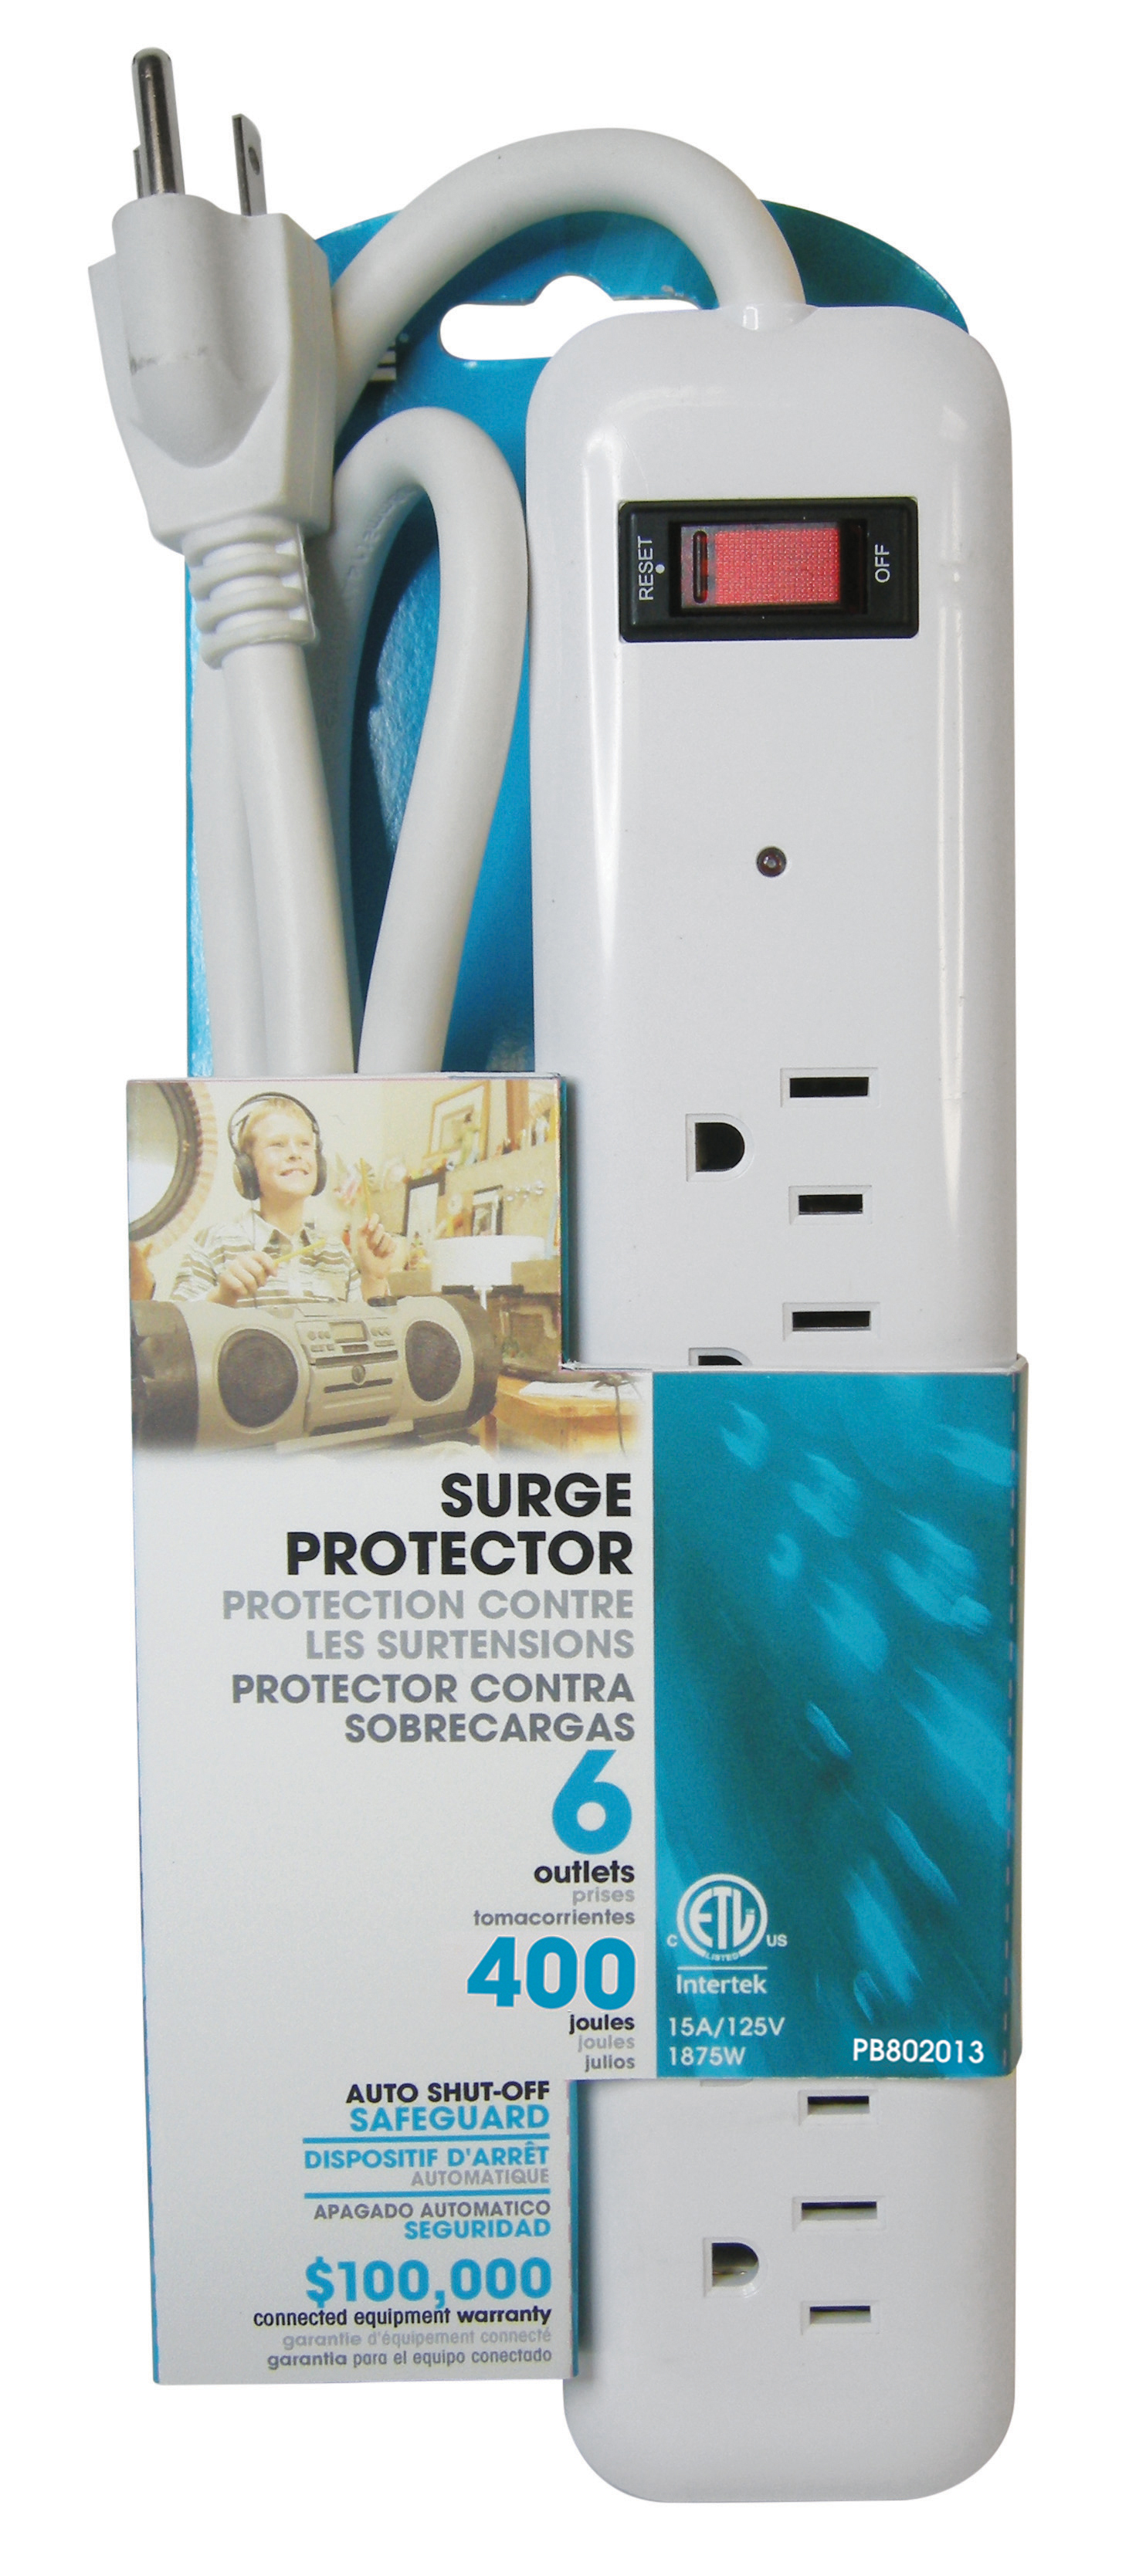 Prime Wire & Cable PB802013 6 Outlet 400 Joule Surge 18-Inch cord, White